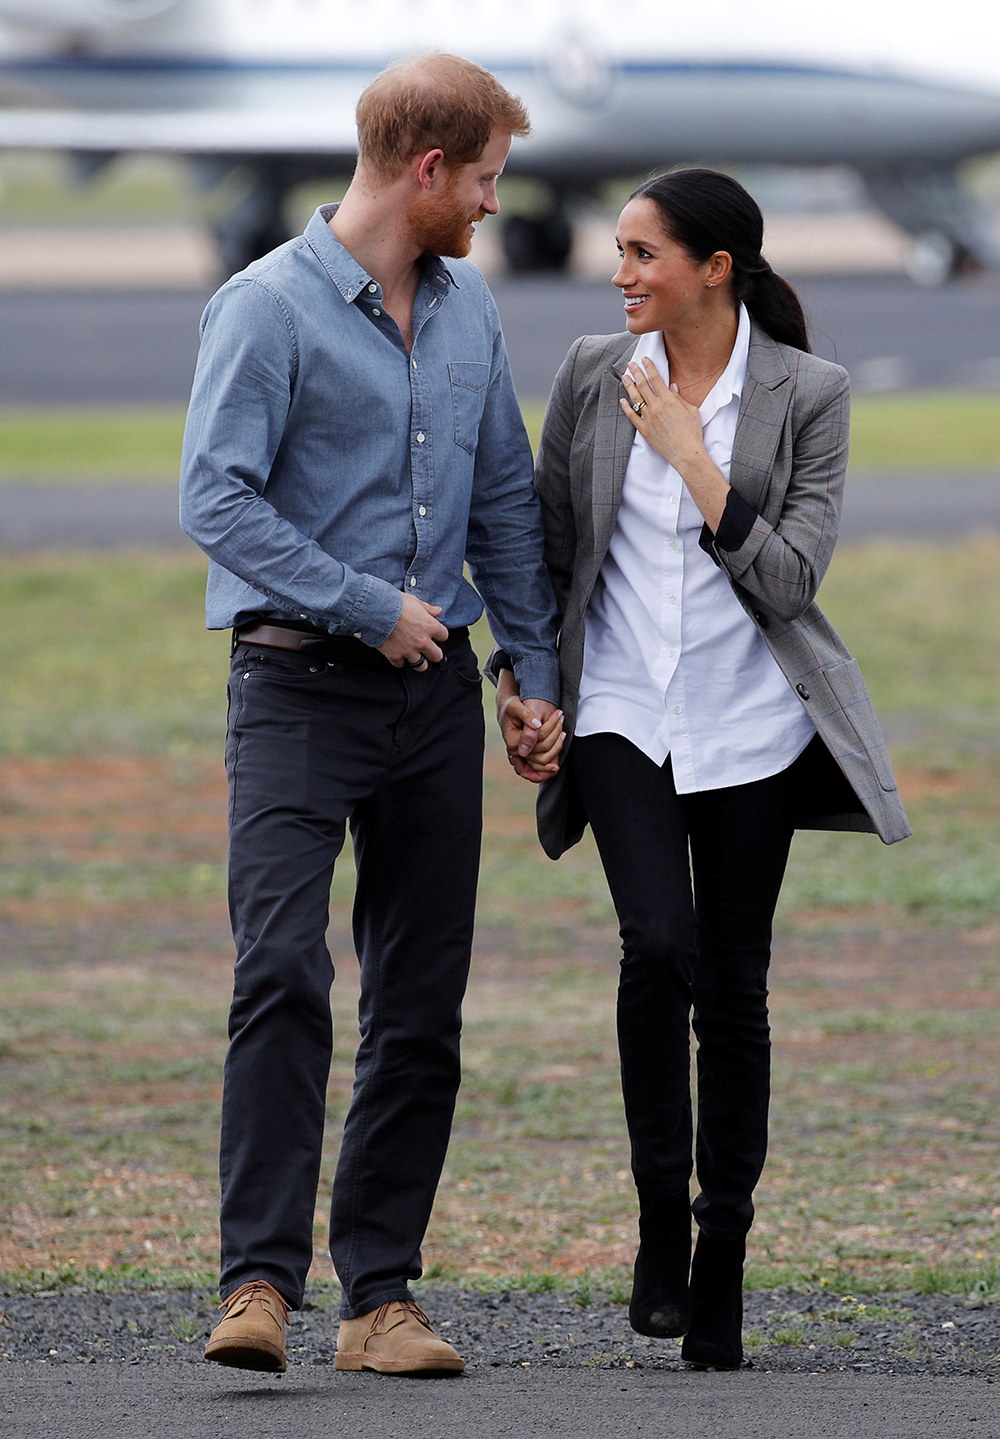 DUBBO, AUSTRALIA - OCTOBER 17: Prince Harry, Duke of Sussex and Meghan, Duchess of Sussex arrive at Dubbo Airport on October 17, 2018 in Dubbo, Australia. The Duke and Duchess of Sussex are on their official 16-day Autumn tour visiting cities in Australia, Fiji, Tonga and New Zealand. (Photo by Phil Noble - Pool/Getty Images)